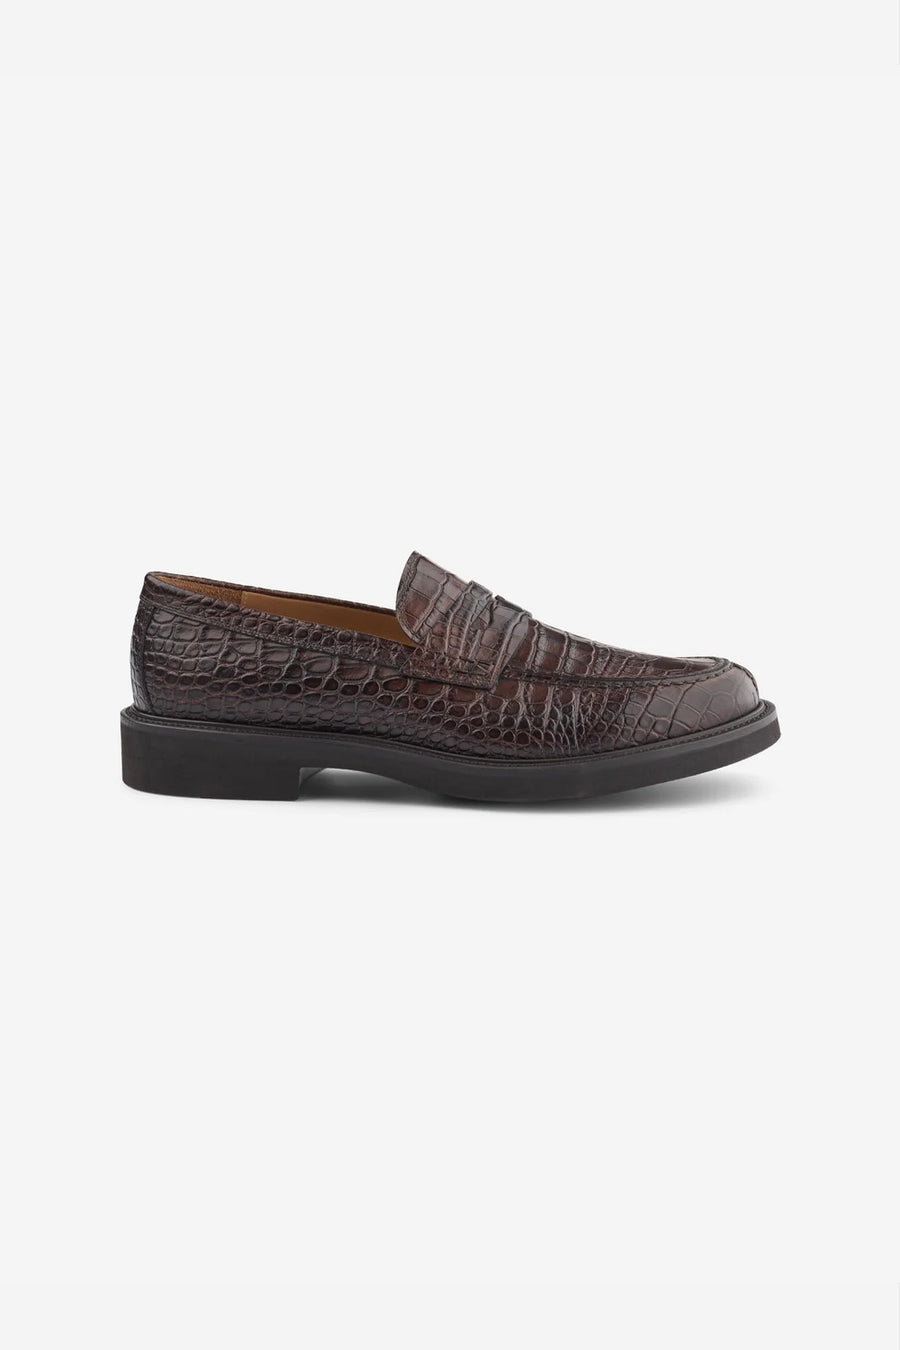 Italian Leather Croc Loafer Brown